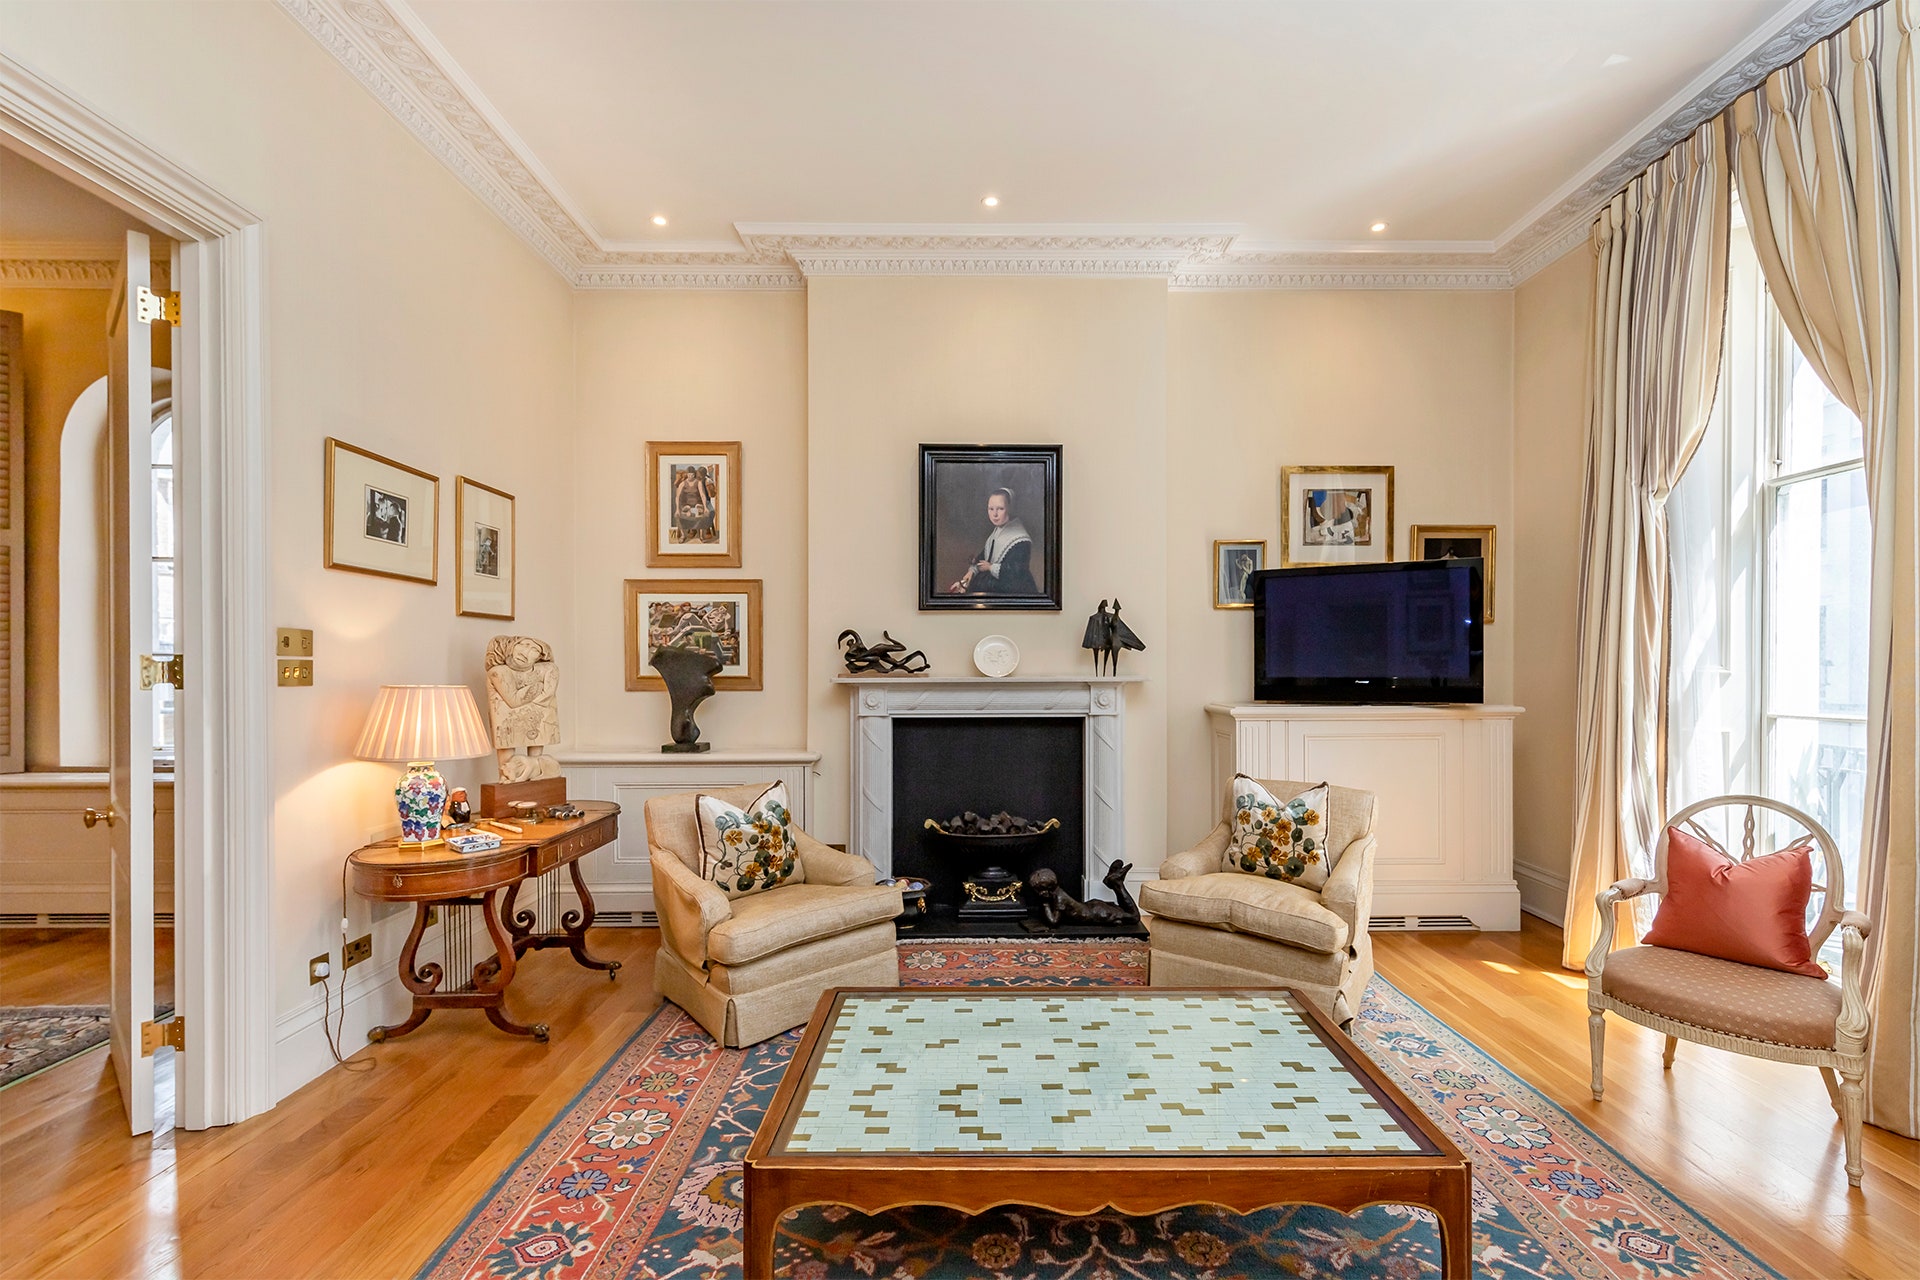 napoleon-iii’s-former-london-home-is-on-the-market-for-4.5-million